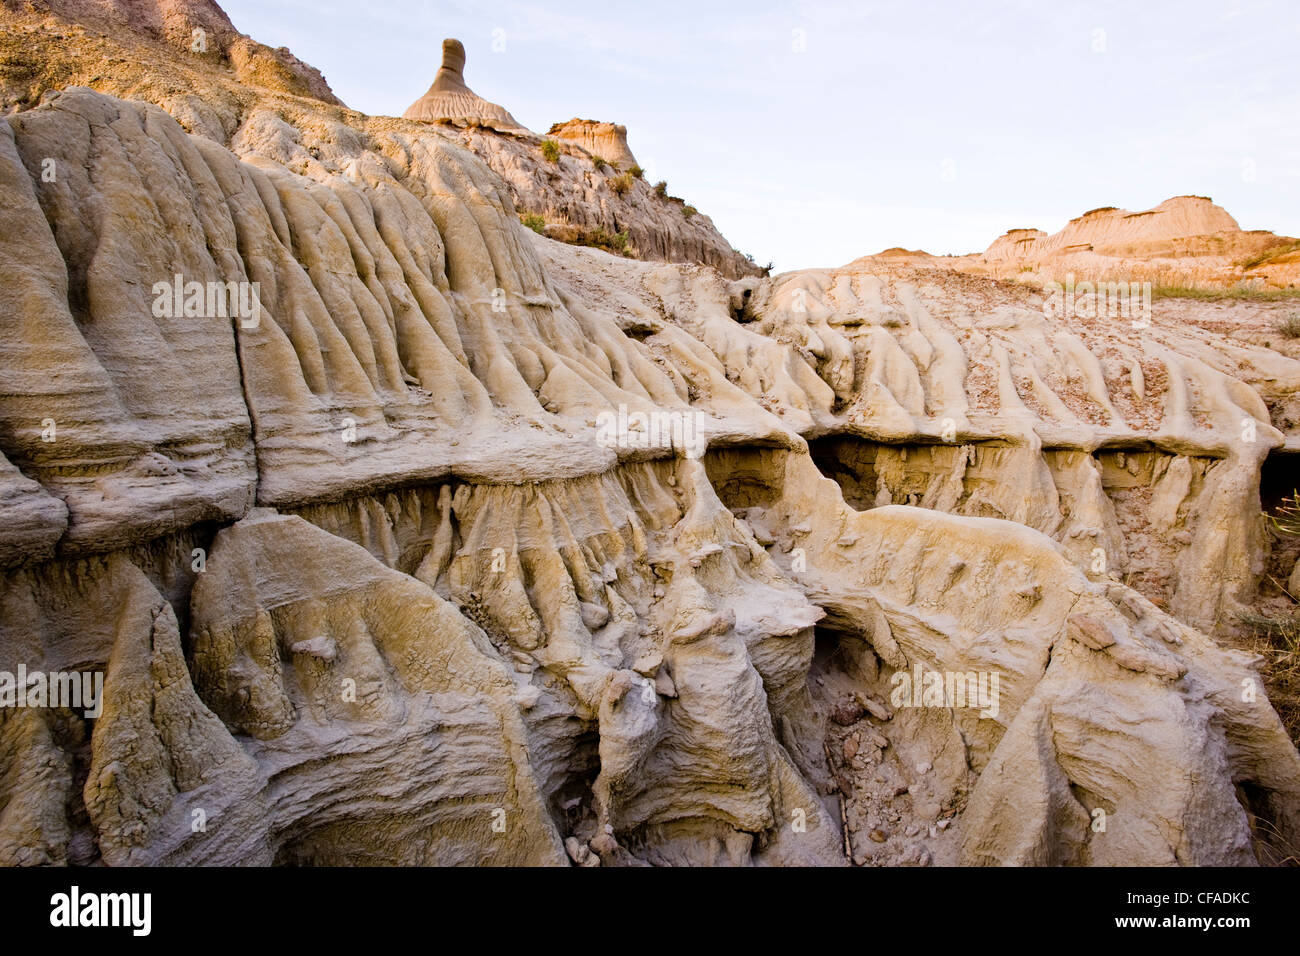 Badlands formations at Dinosaur Provincial Park (a United Nations World Heritage Site), Alberta, Canada Stock Photo